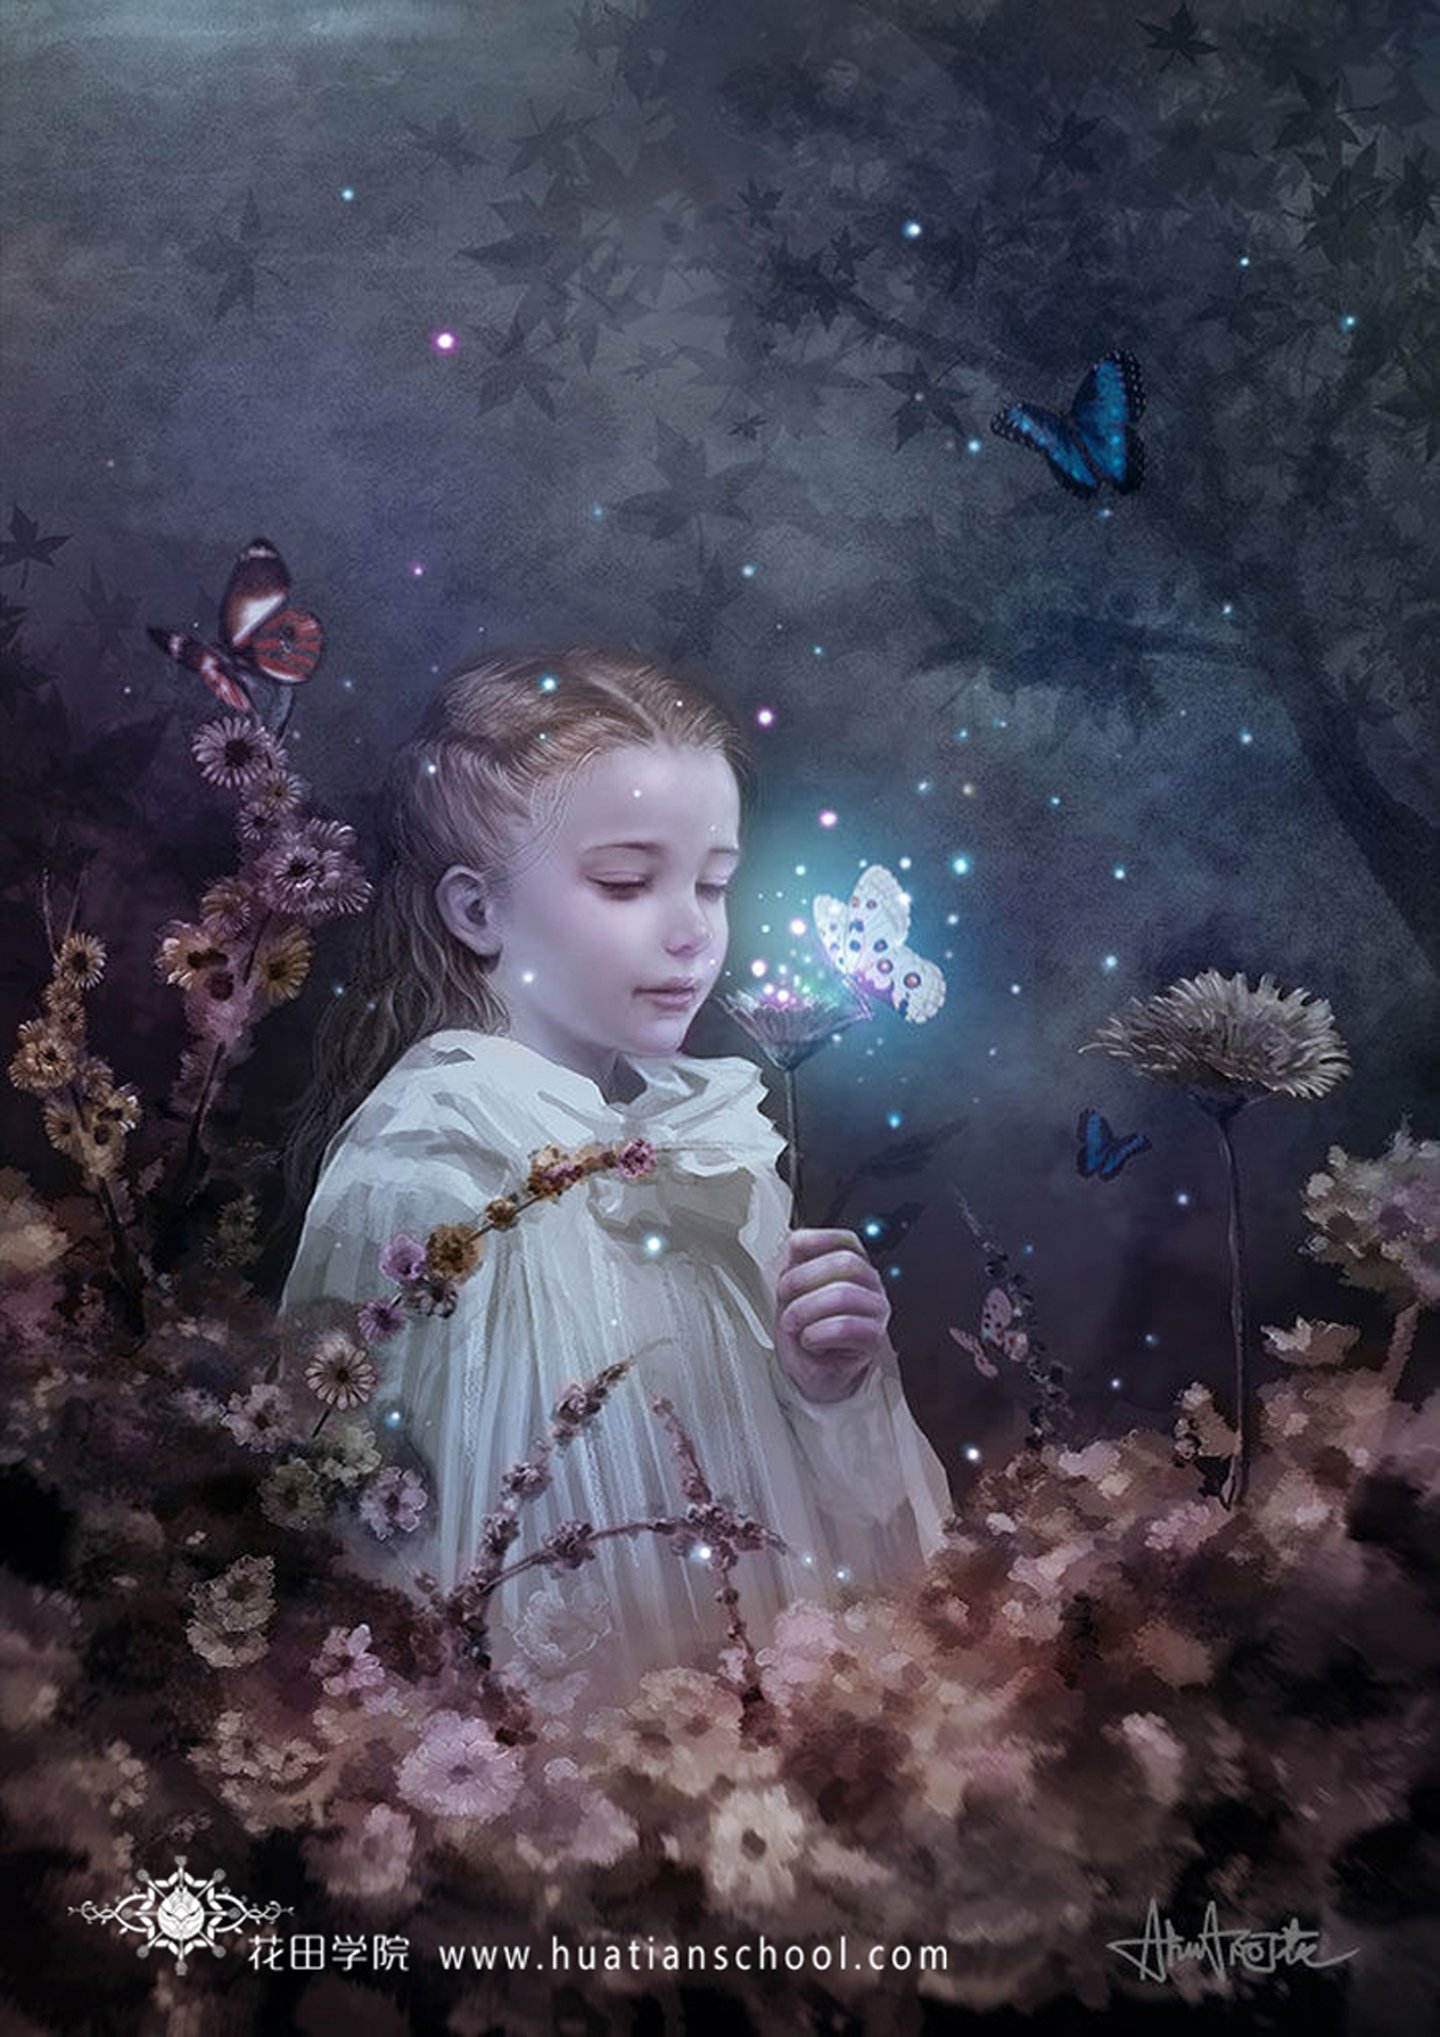 fantasy, Girl, Dress, Flowers, Rose, Beautiful, Forest, Child, Butterfly Wallpaper